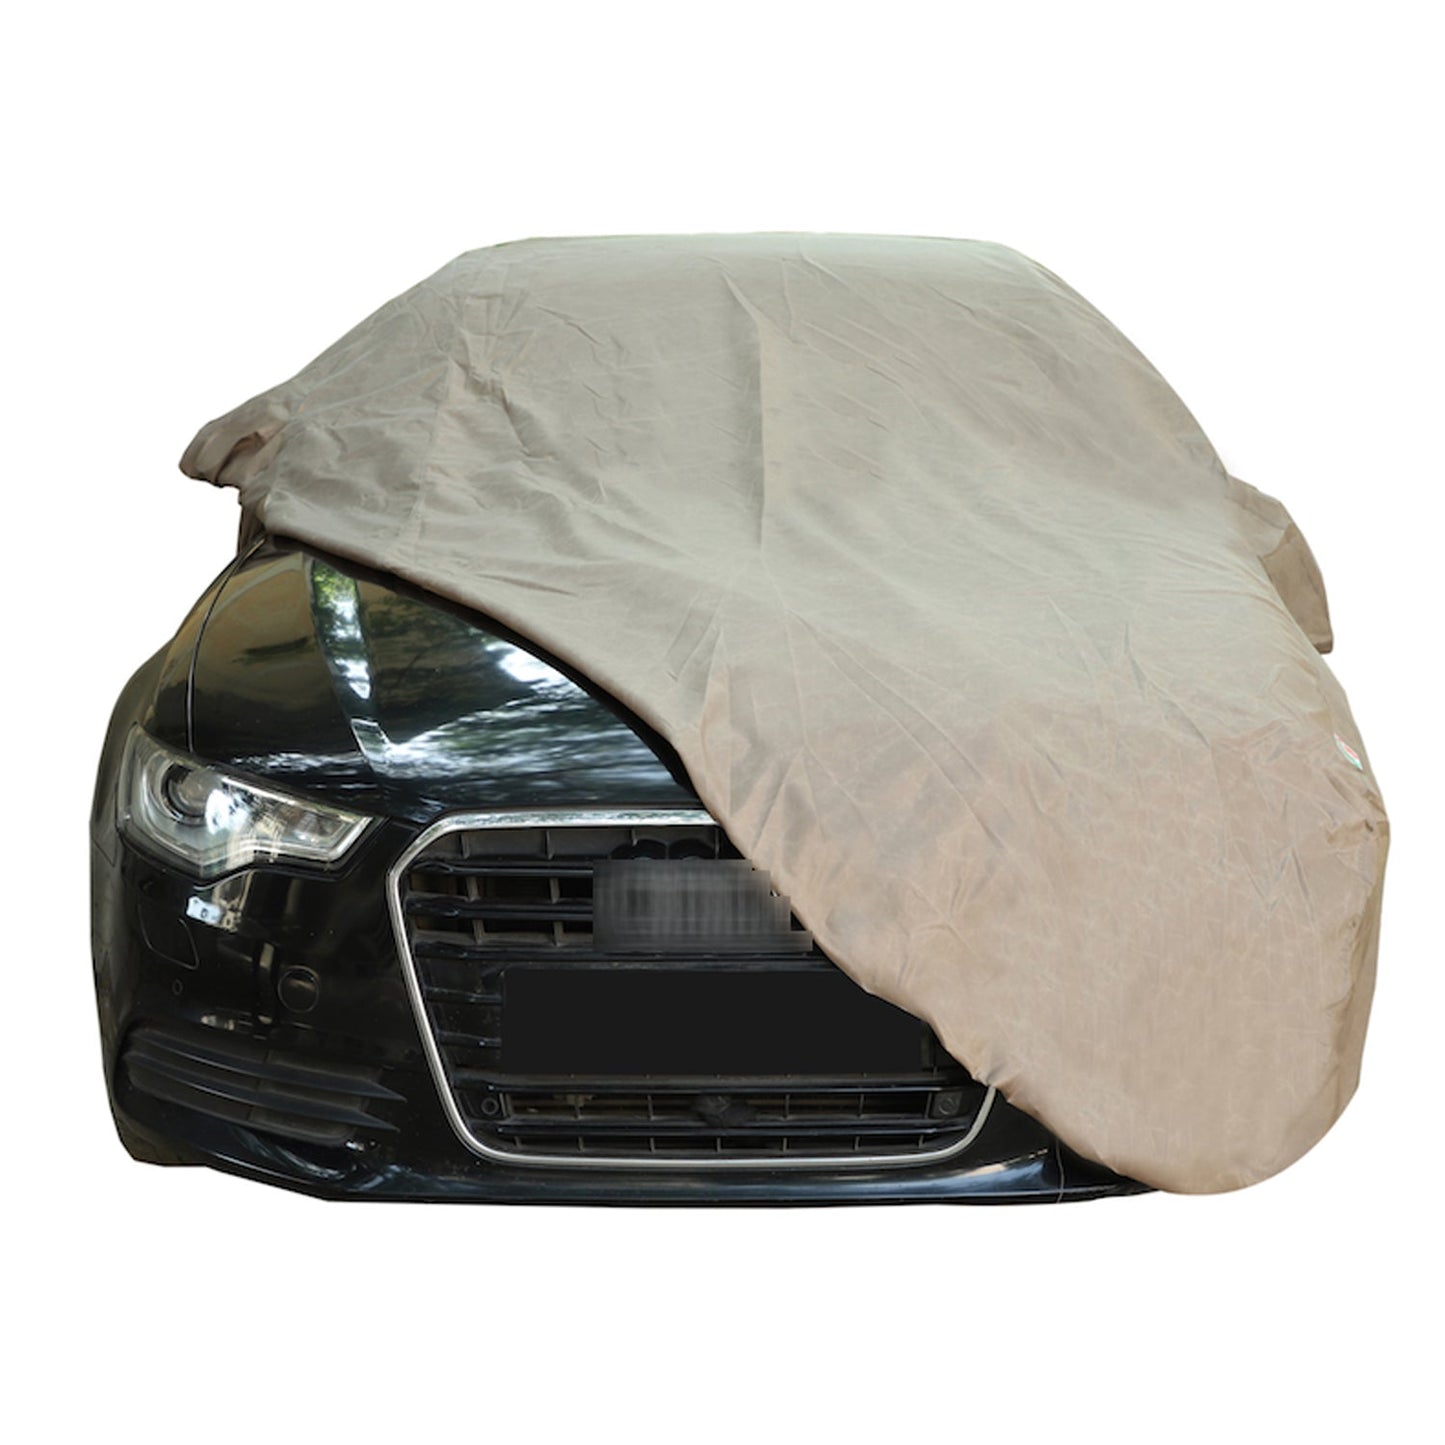 Oshotto Brown 100% Waterproof Car Body Cover with Mirror Pockets For Tata Sumo/Victa